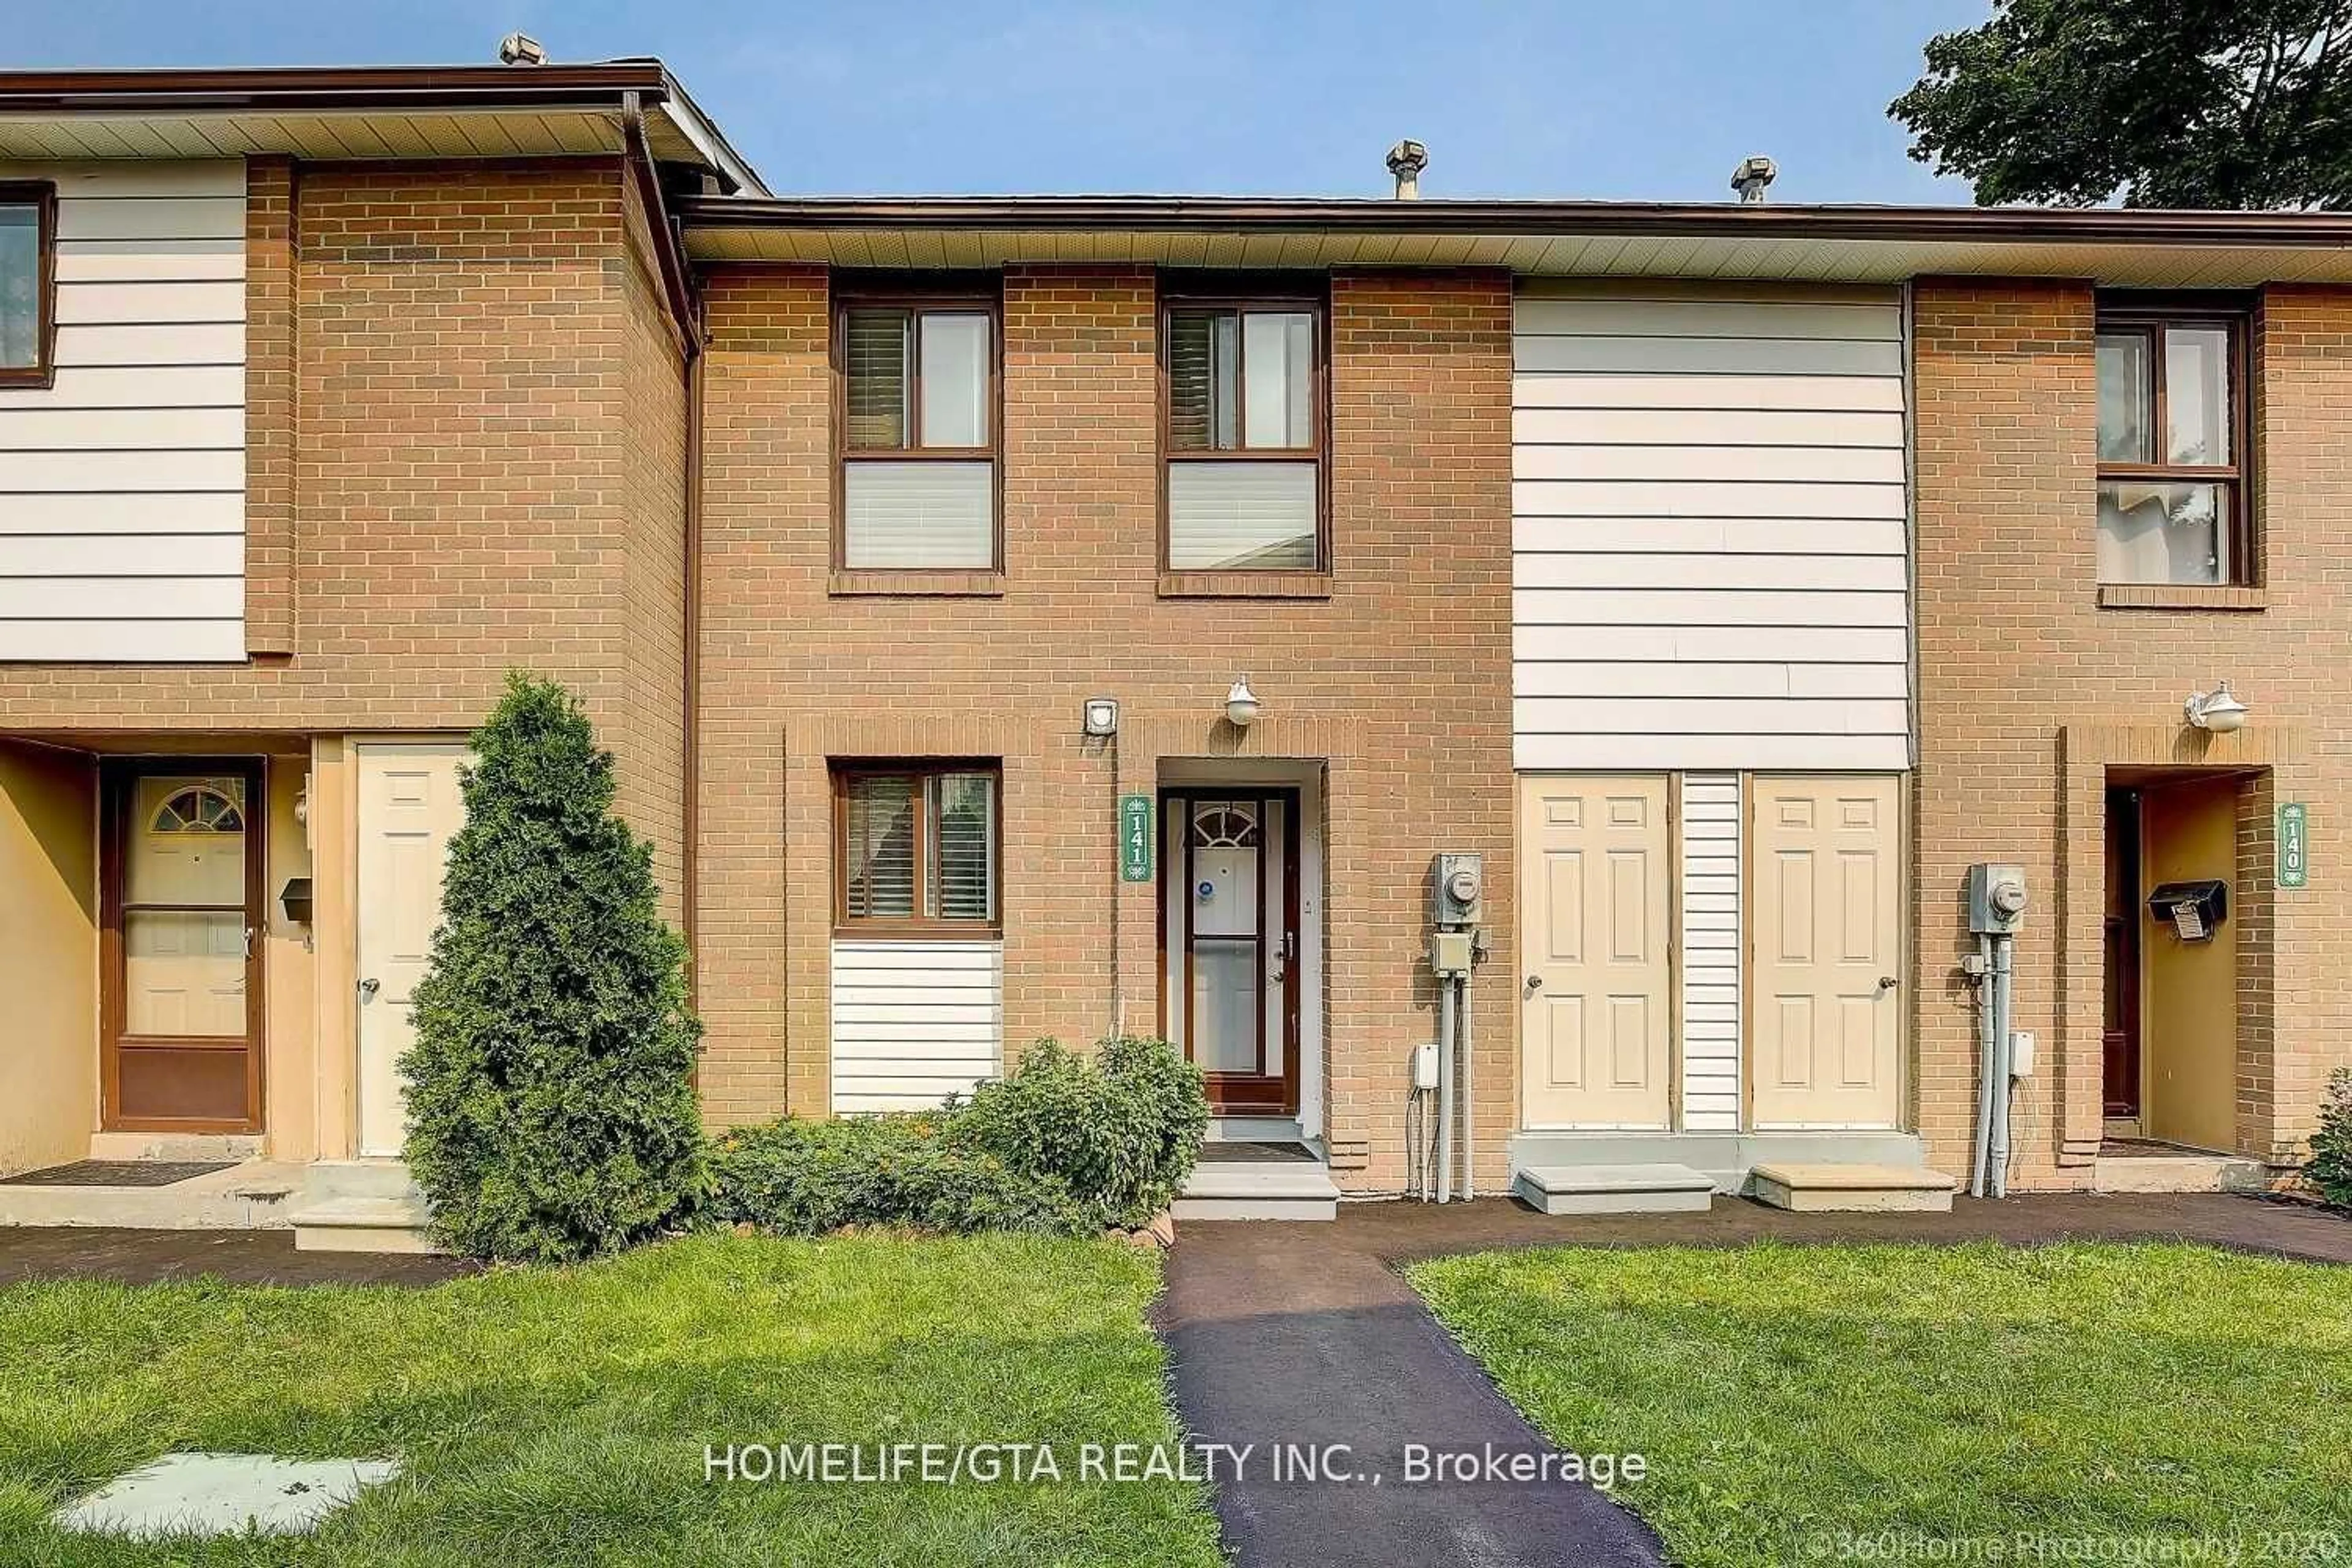 A pic from exterior of the house or condo for 141 Fleetwood Cres #141, Brampton Ontario L6T 2E6